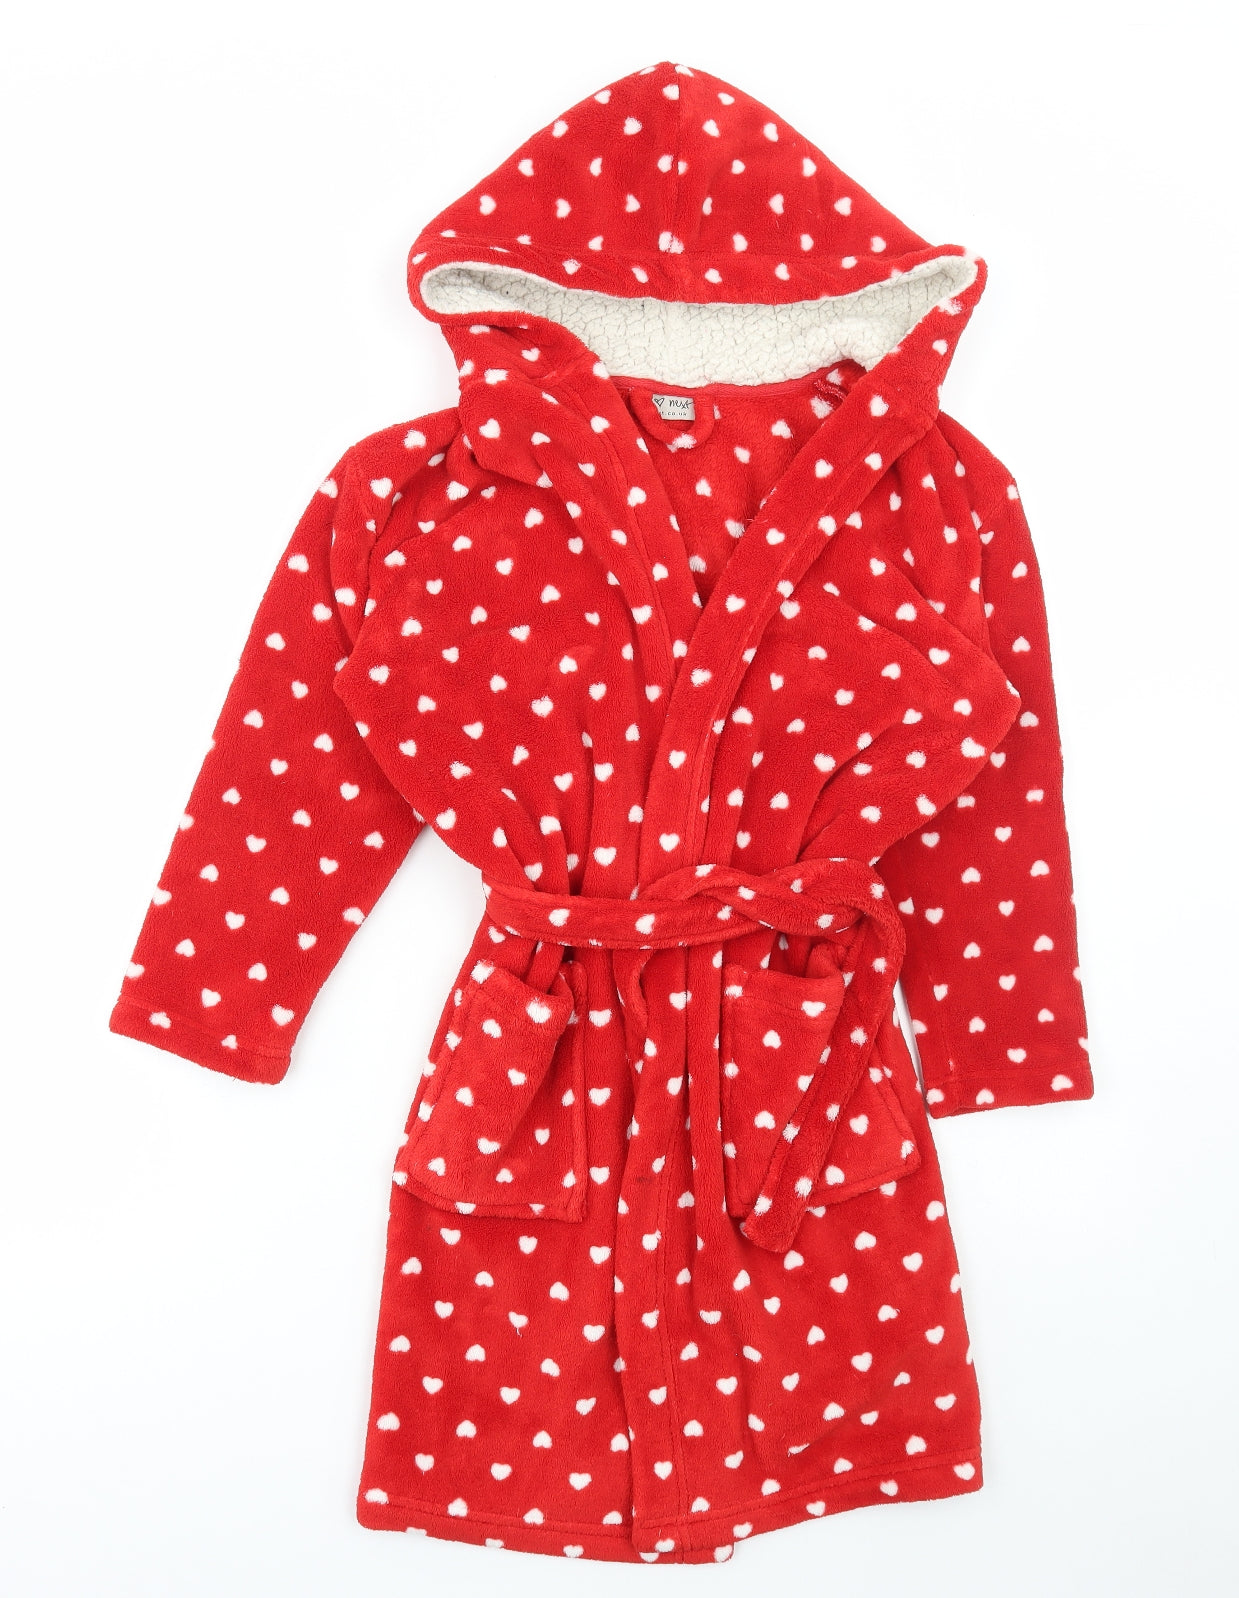 NEXT Girls Red Polka Dot Polyester Robe Size 9-10 Years Tie